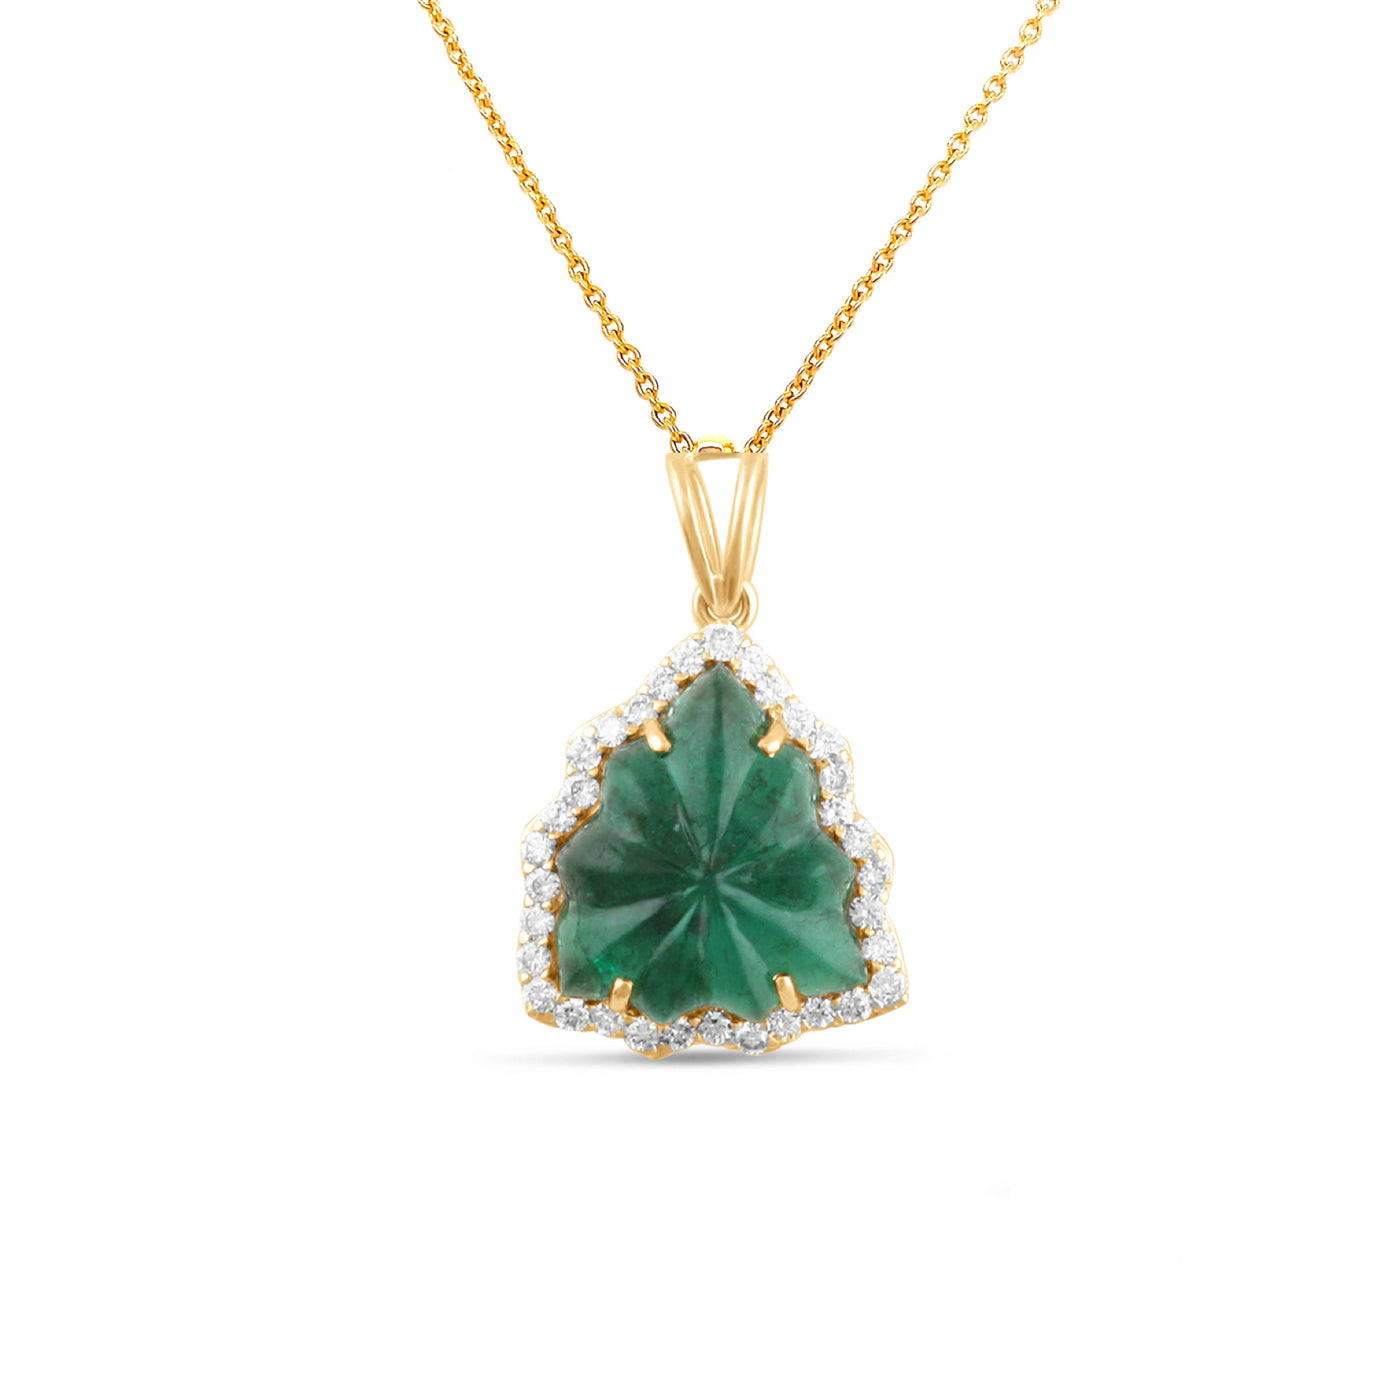 Emerald Carving And Diamond Pendant In 18K Yellow Gold